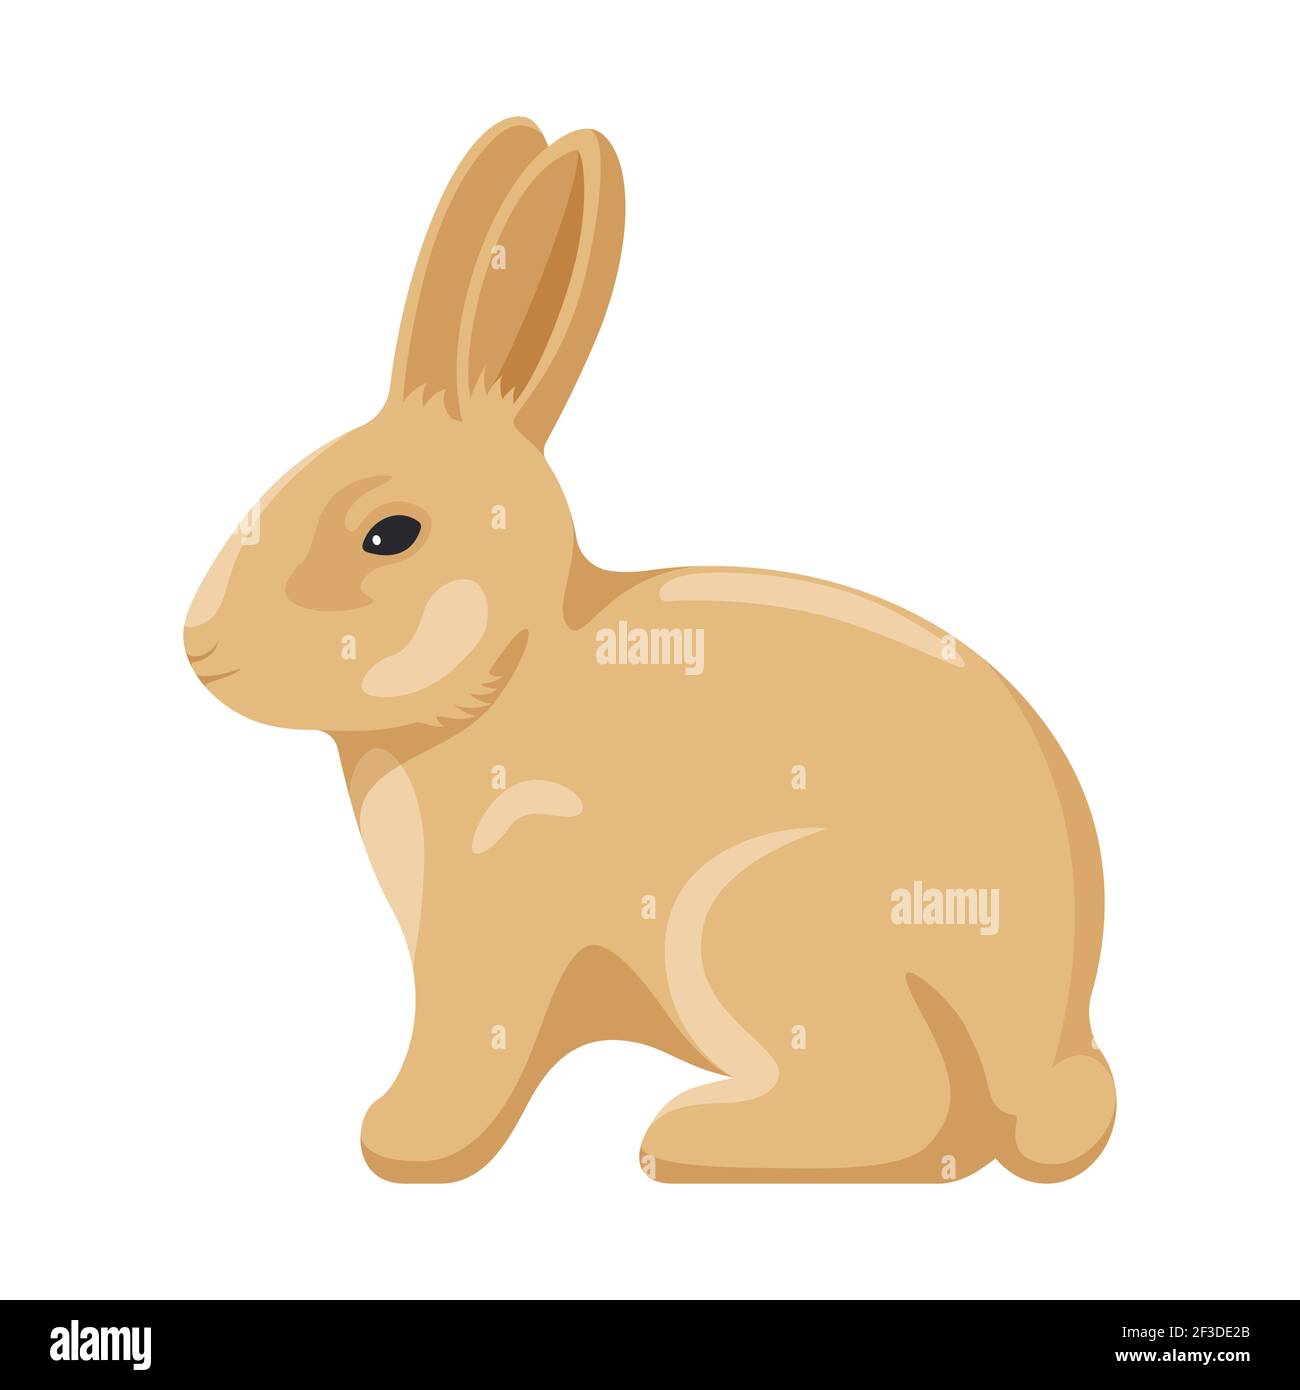 Cute bunny. Vector illustration of a cute yellow Easter bunny isolated on a white background. Stock Vector